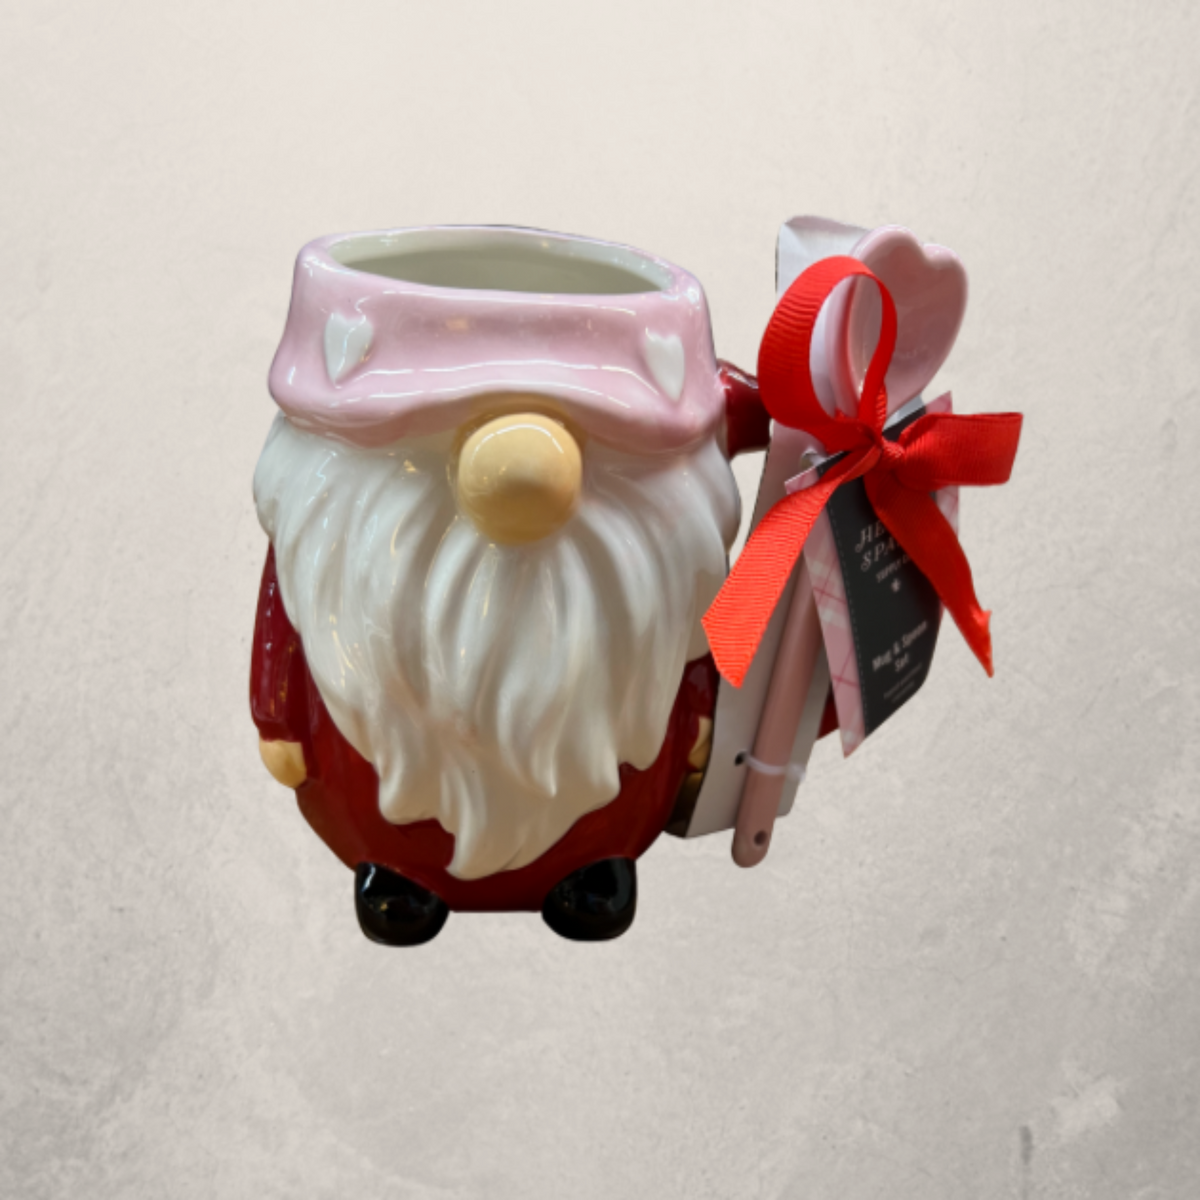 Gnome Sweet Gnome Mug Candle – In the Wick of Time